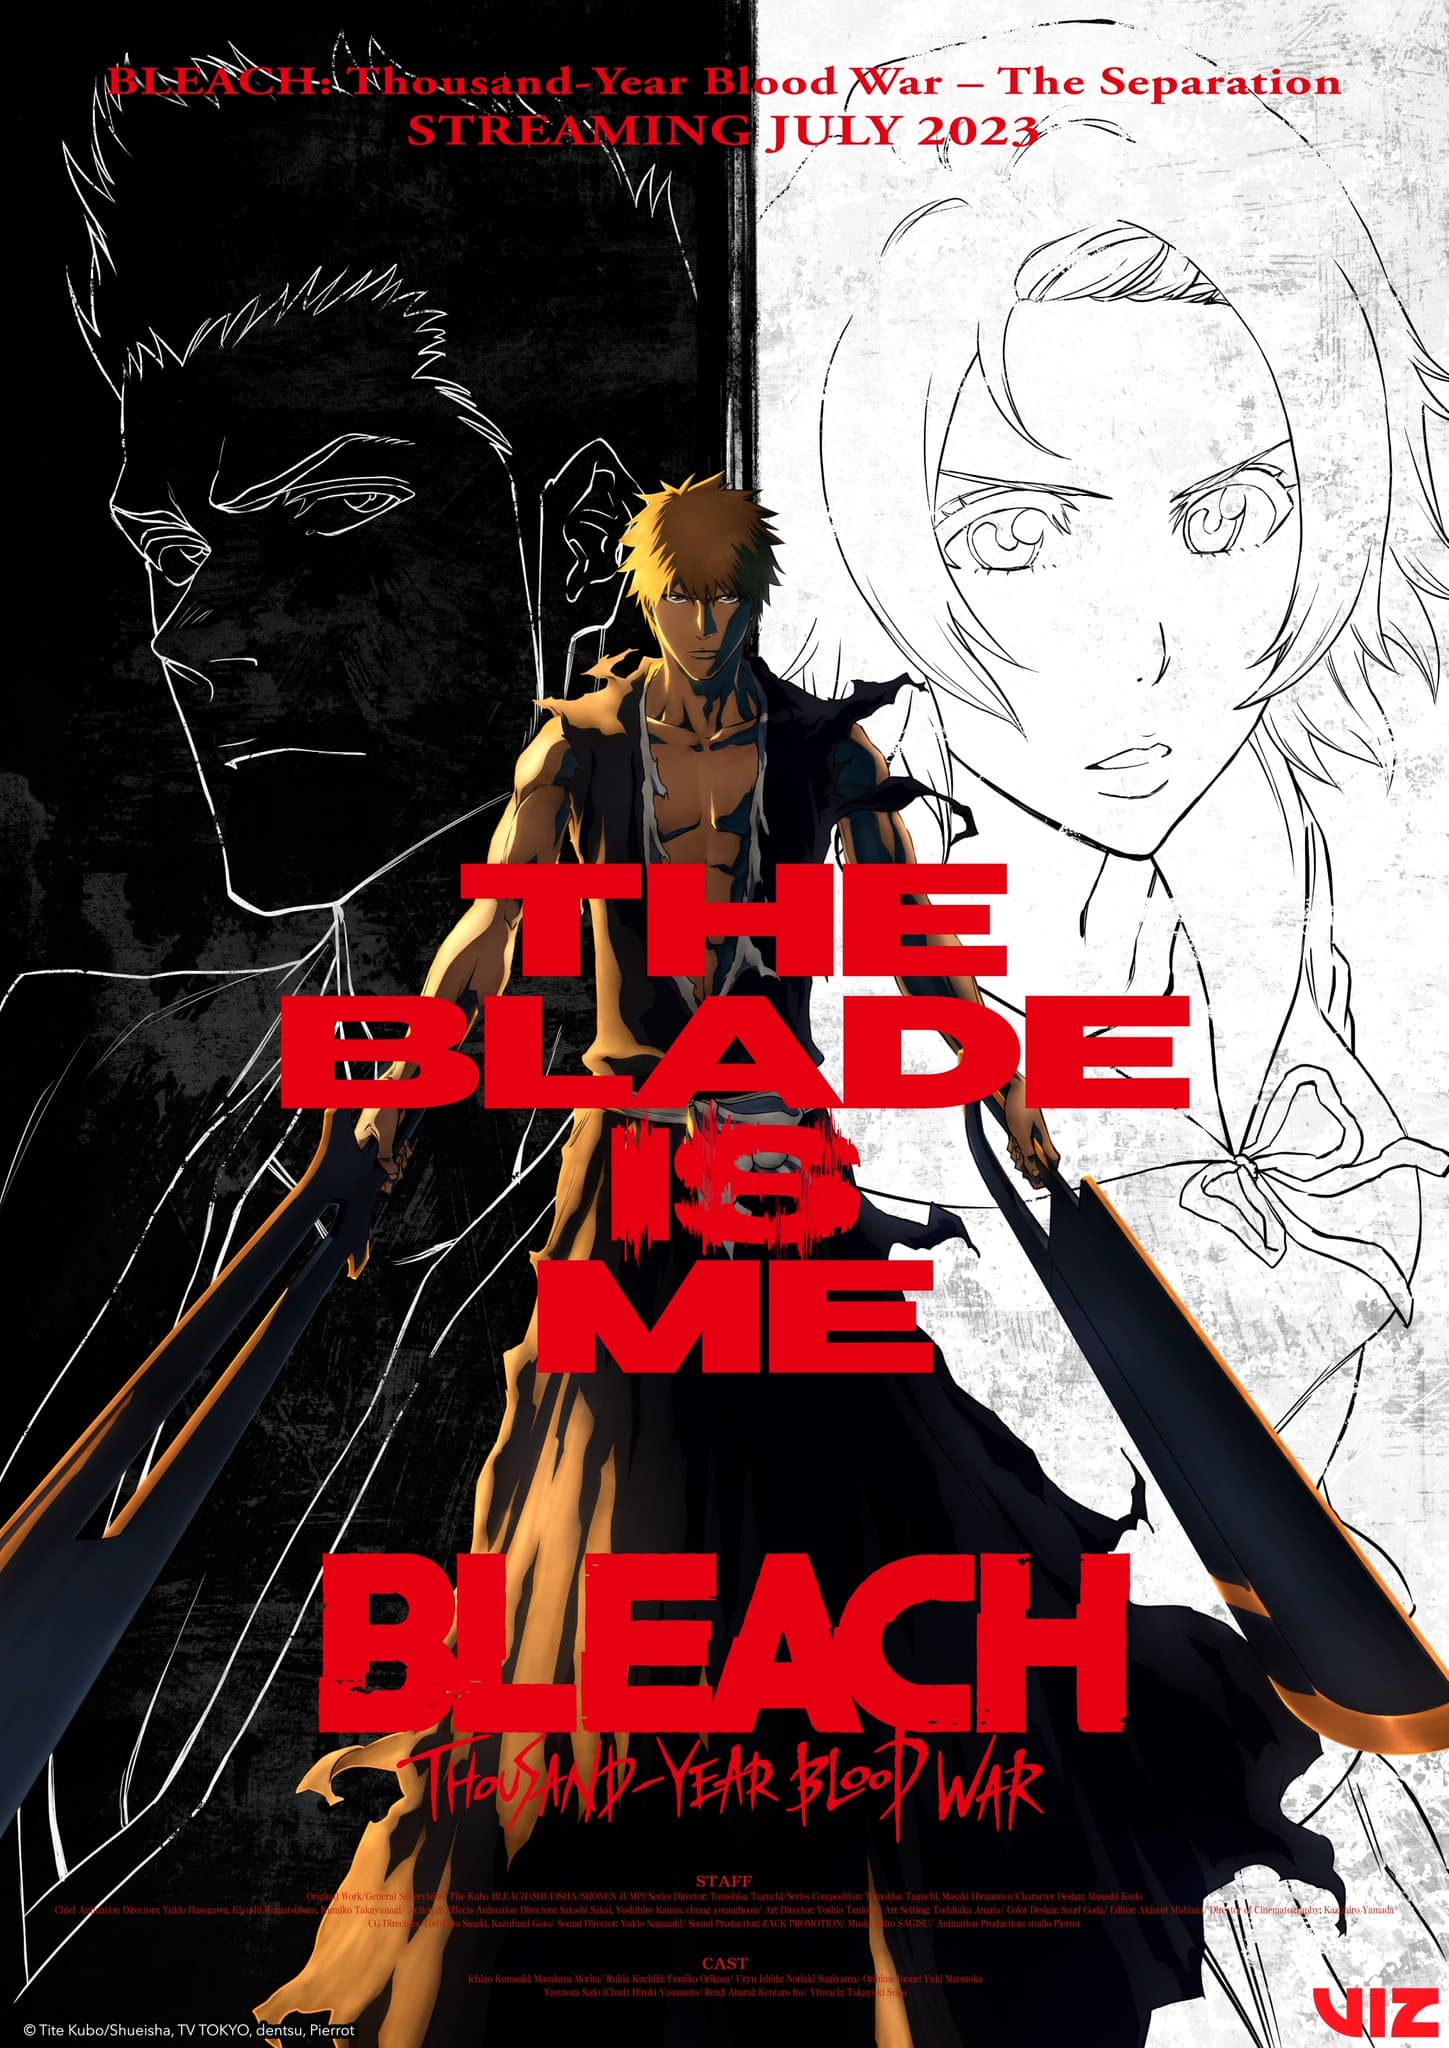 Bleach Animated World - Crunchyroll vs Disney See the difference